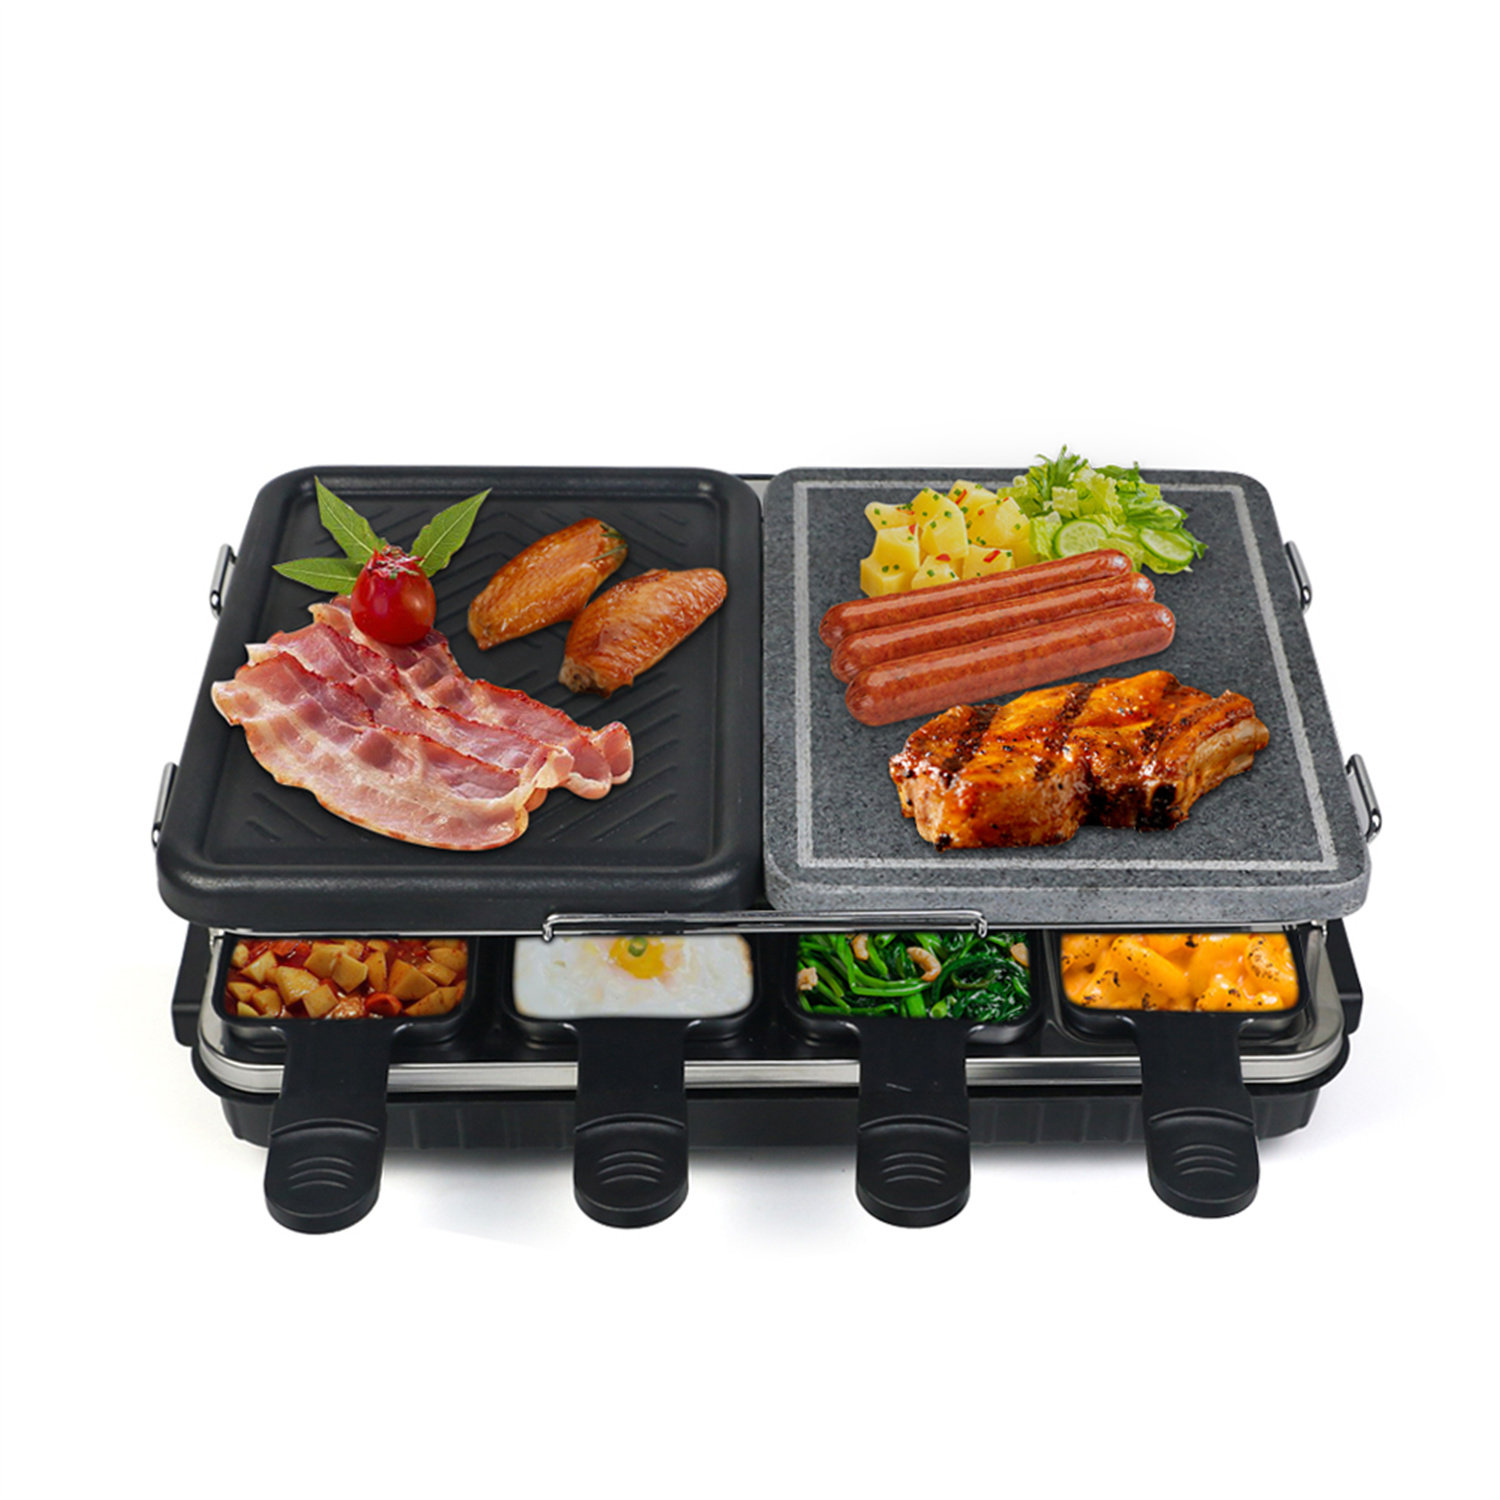 ZONSE 20 W x 11 D Portable Indoor/Outdoor Use Countertop Electric Grill ZONSE